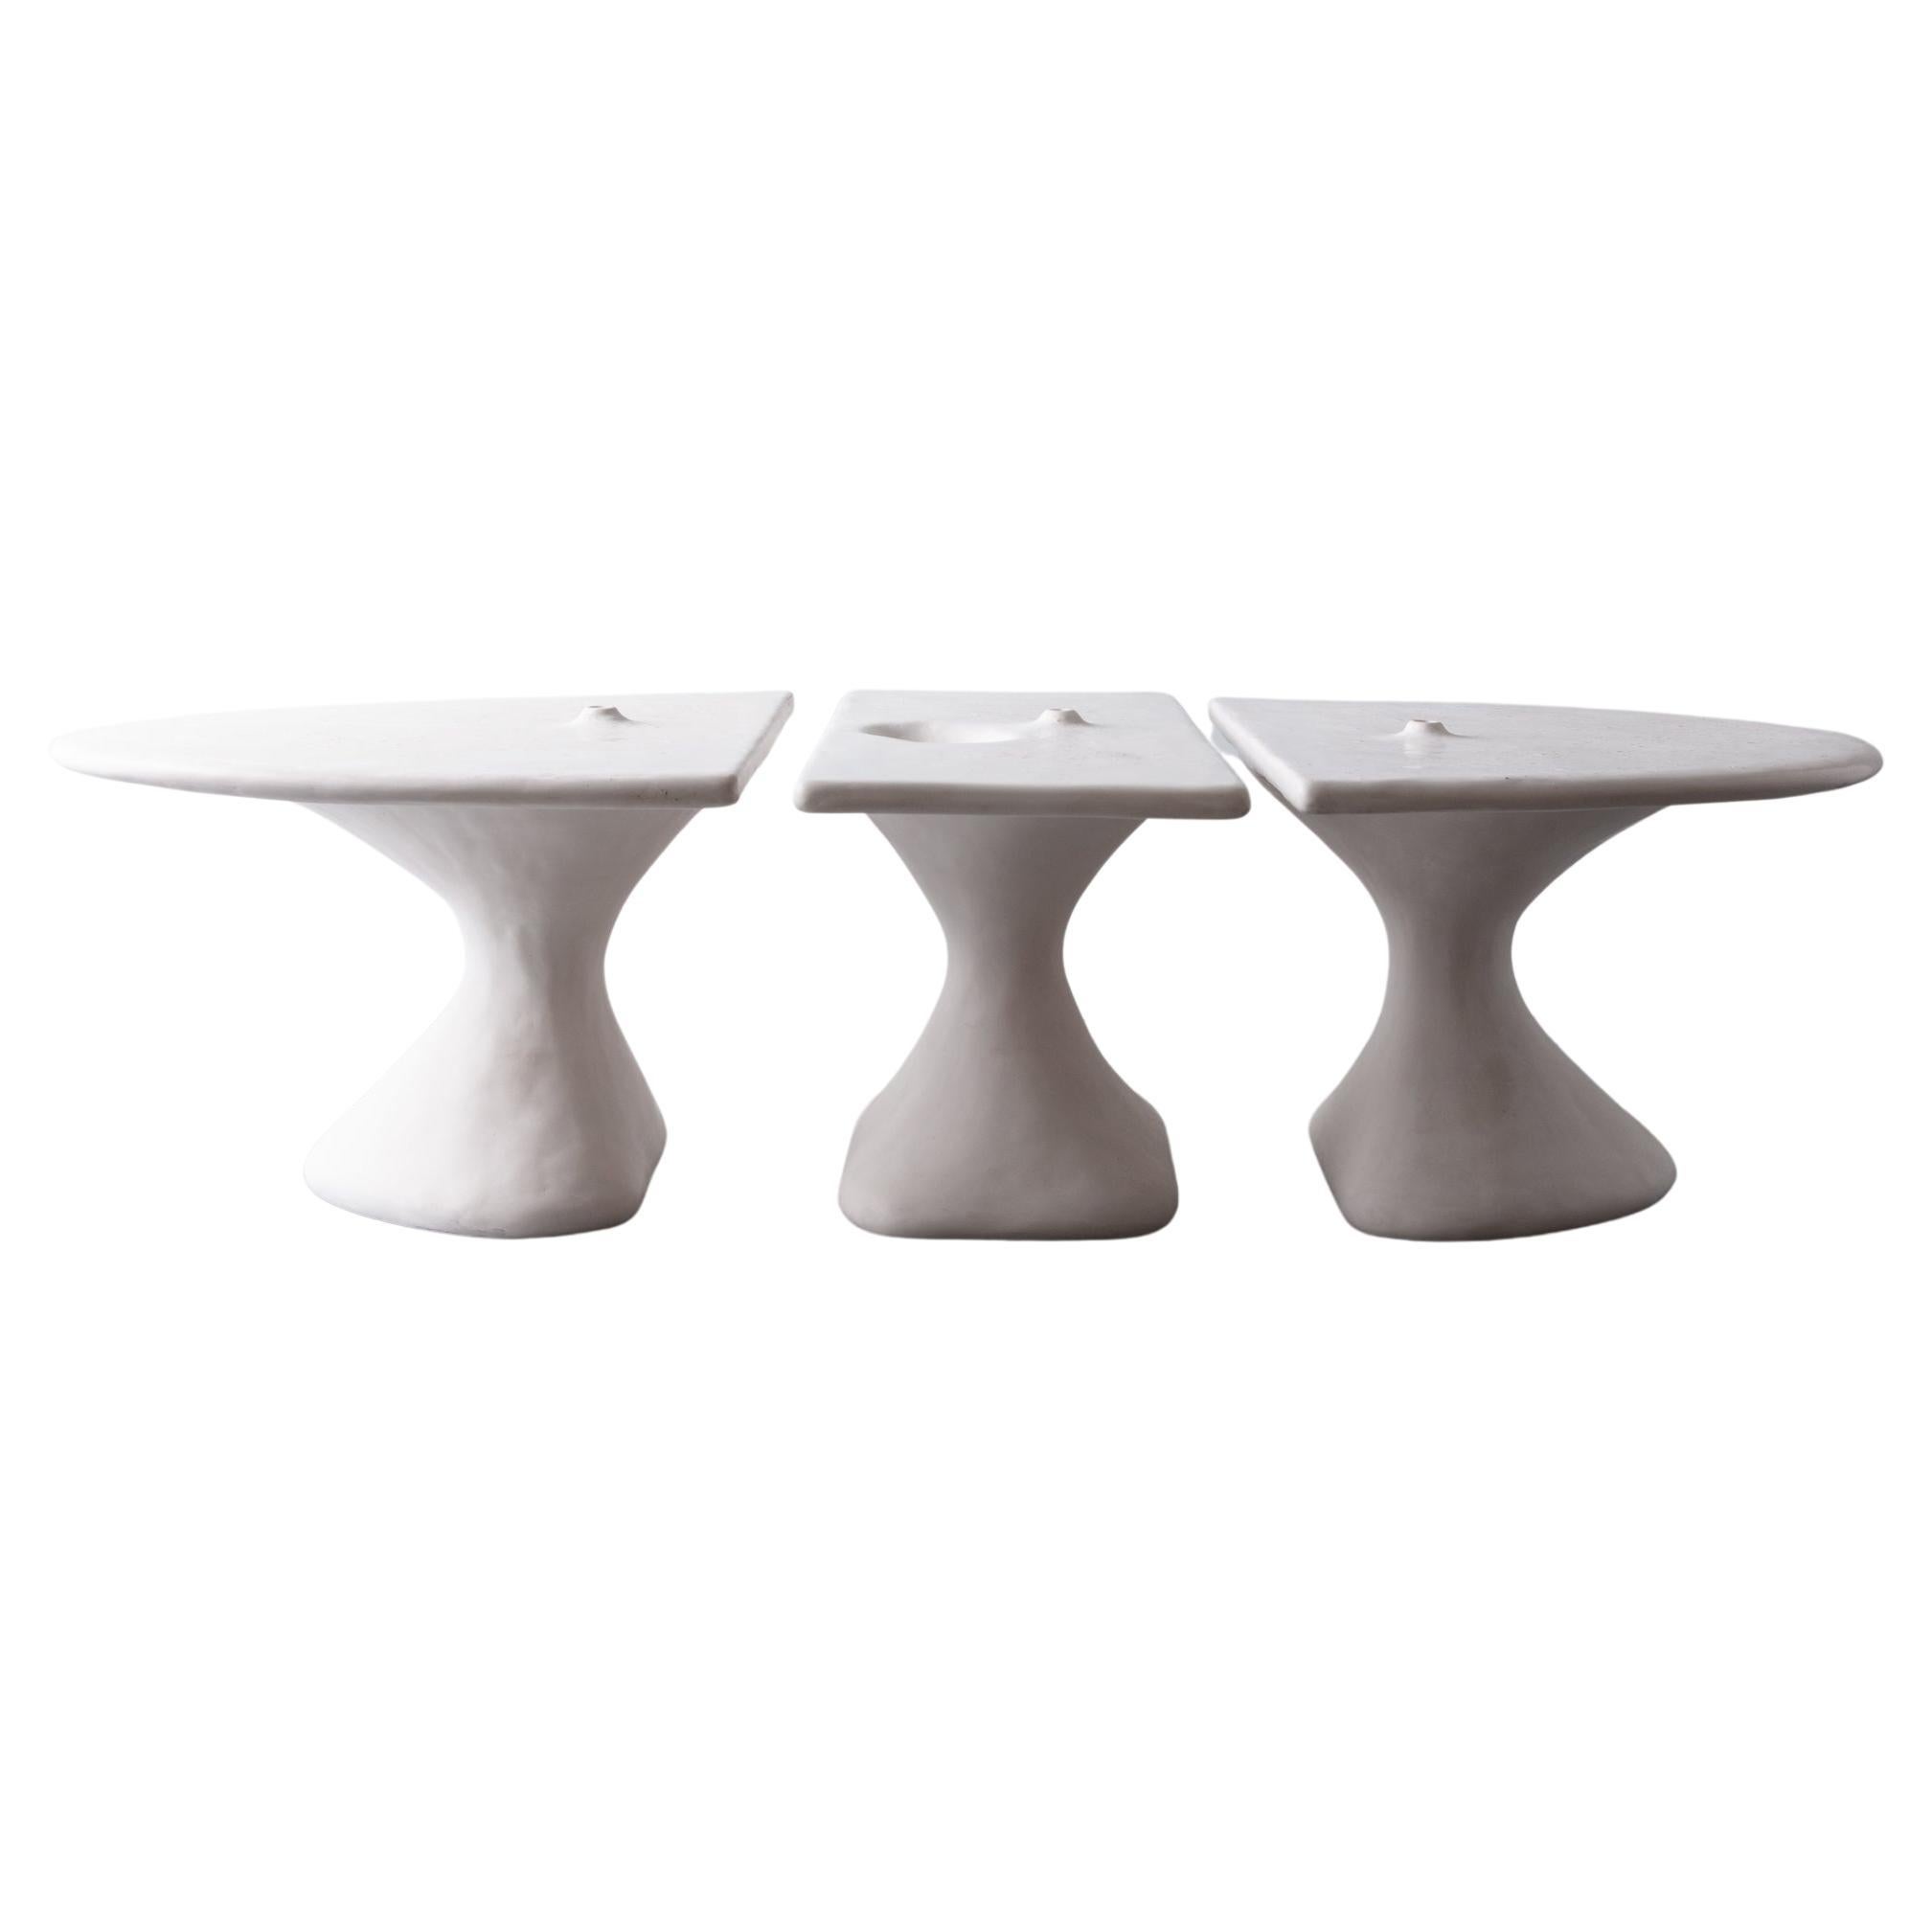 Three-part dining table by Rogan Gregory  For Sale